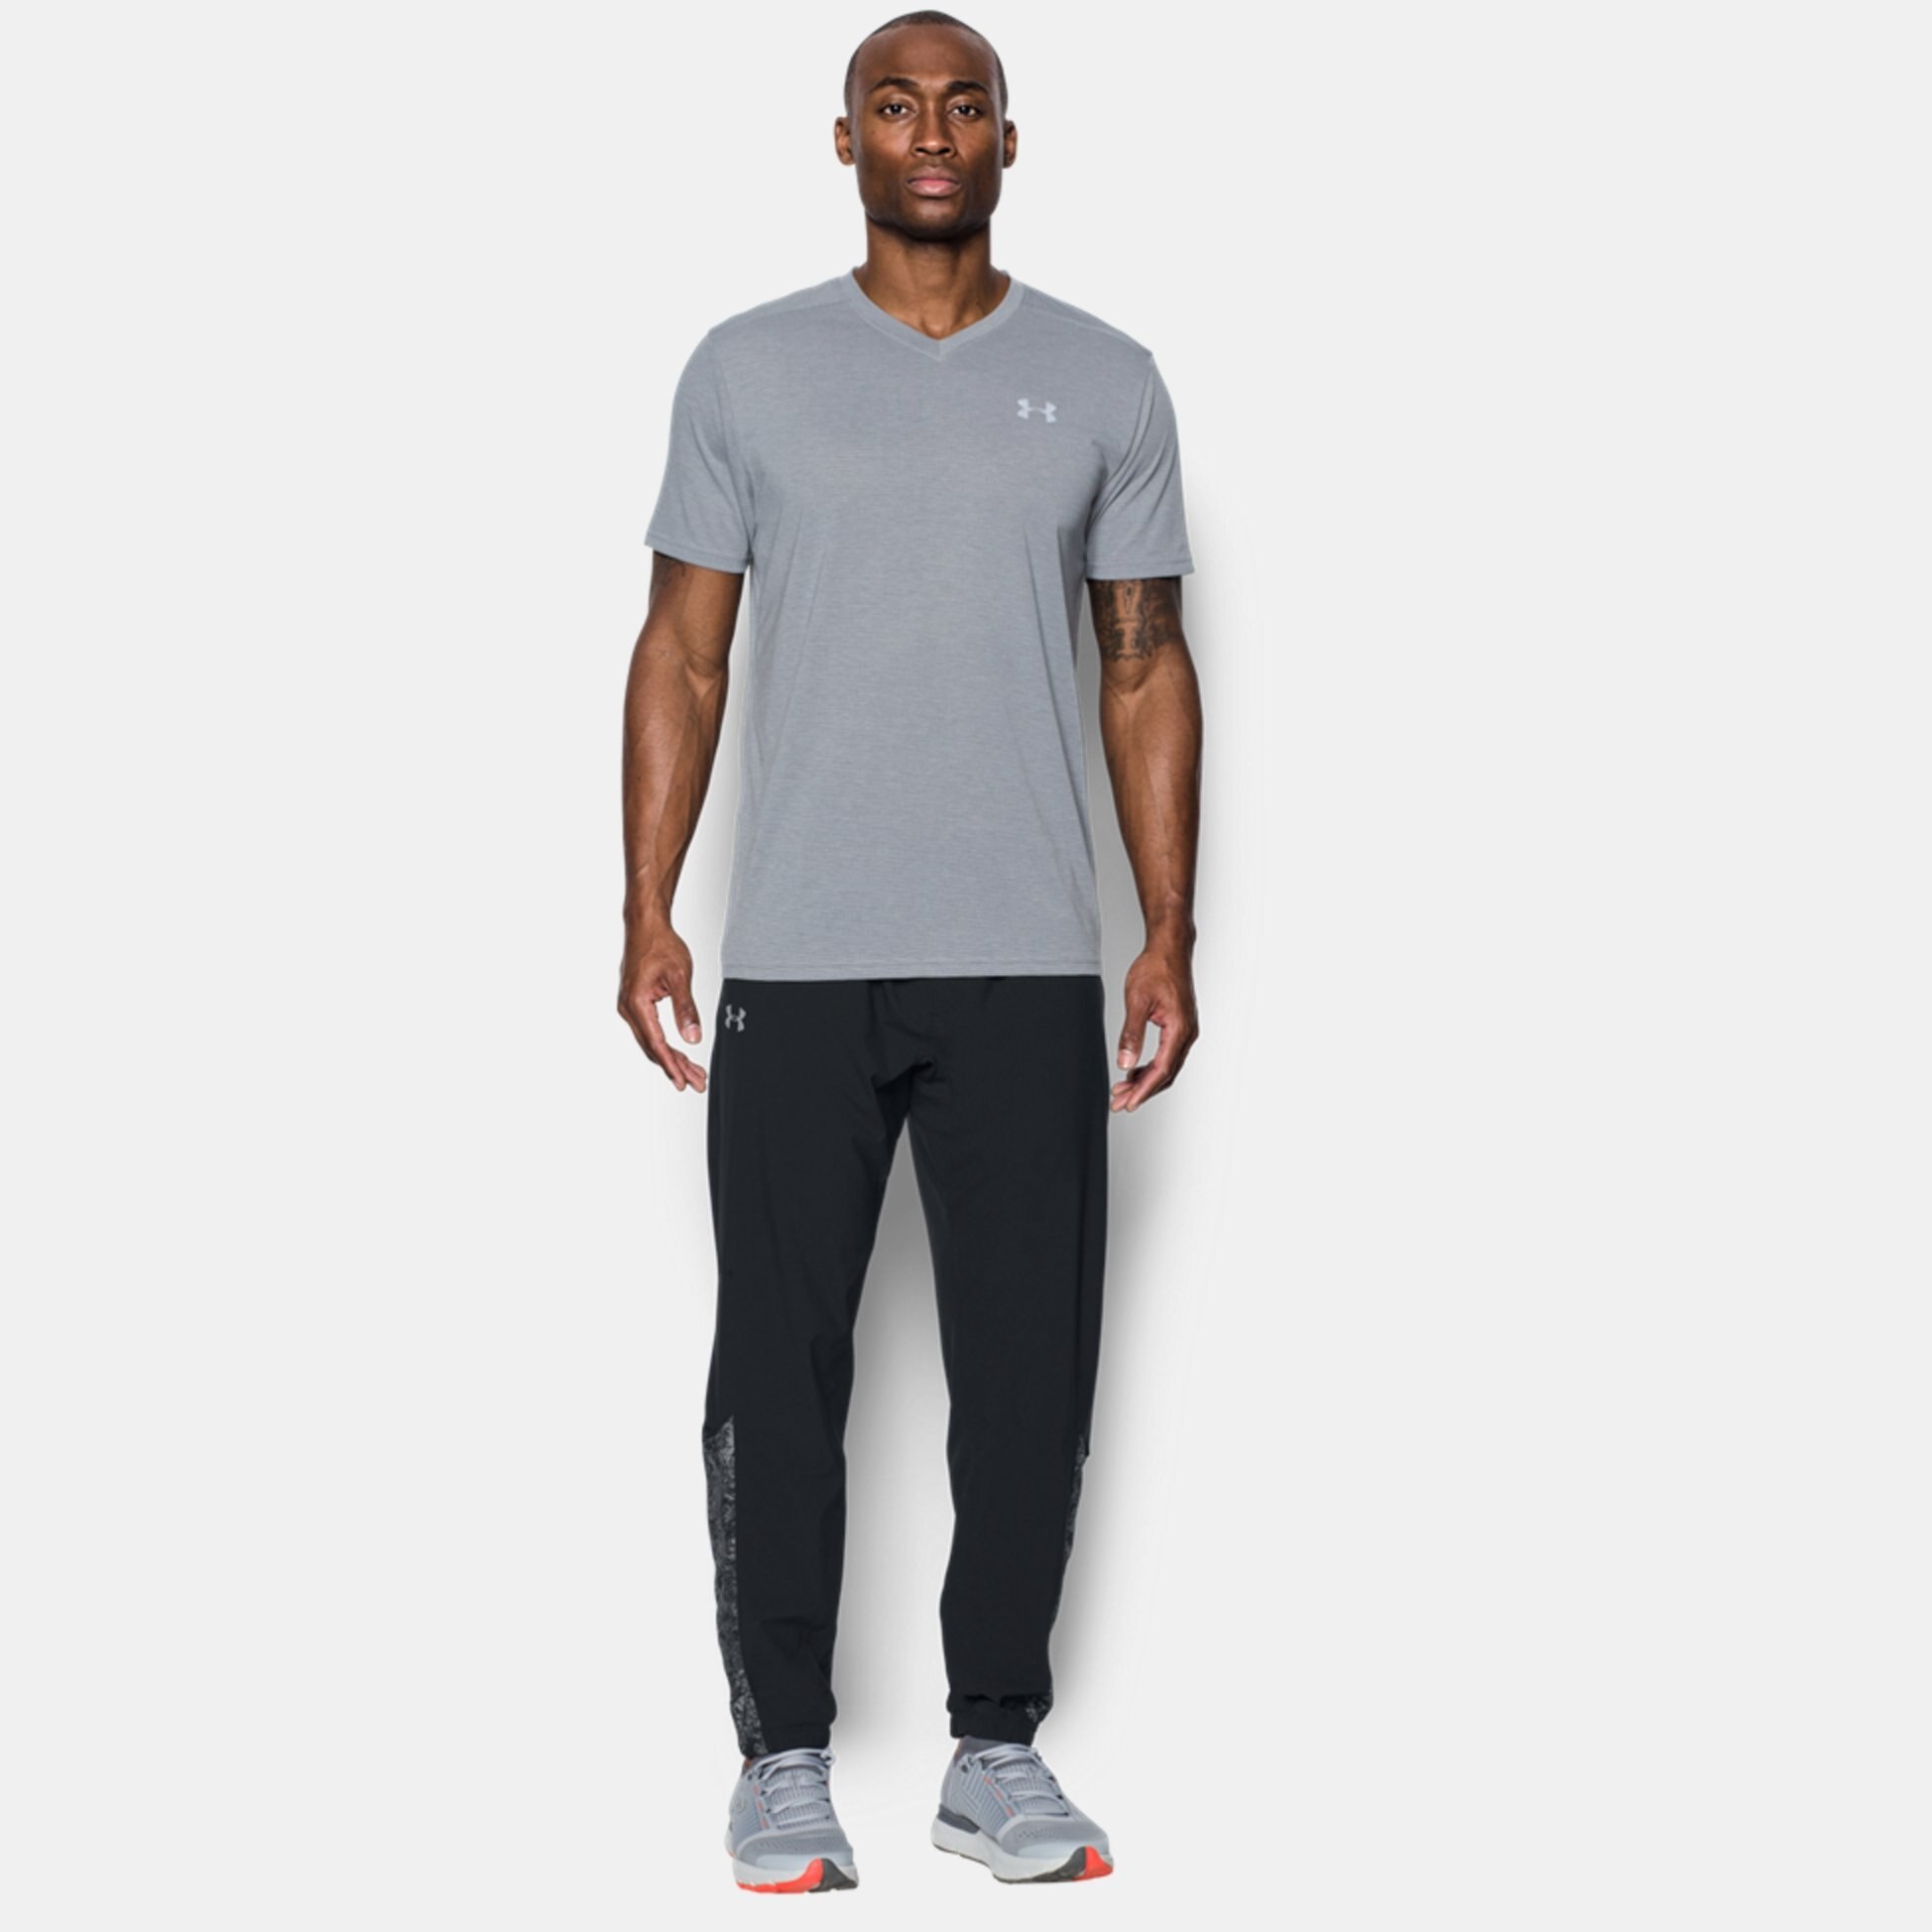 Joggers & Sweatpants -  under armour UA Storm Run Printed Trousers 9753